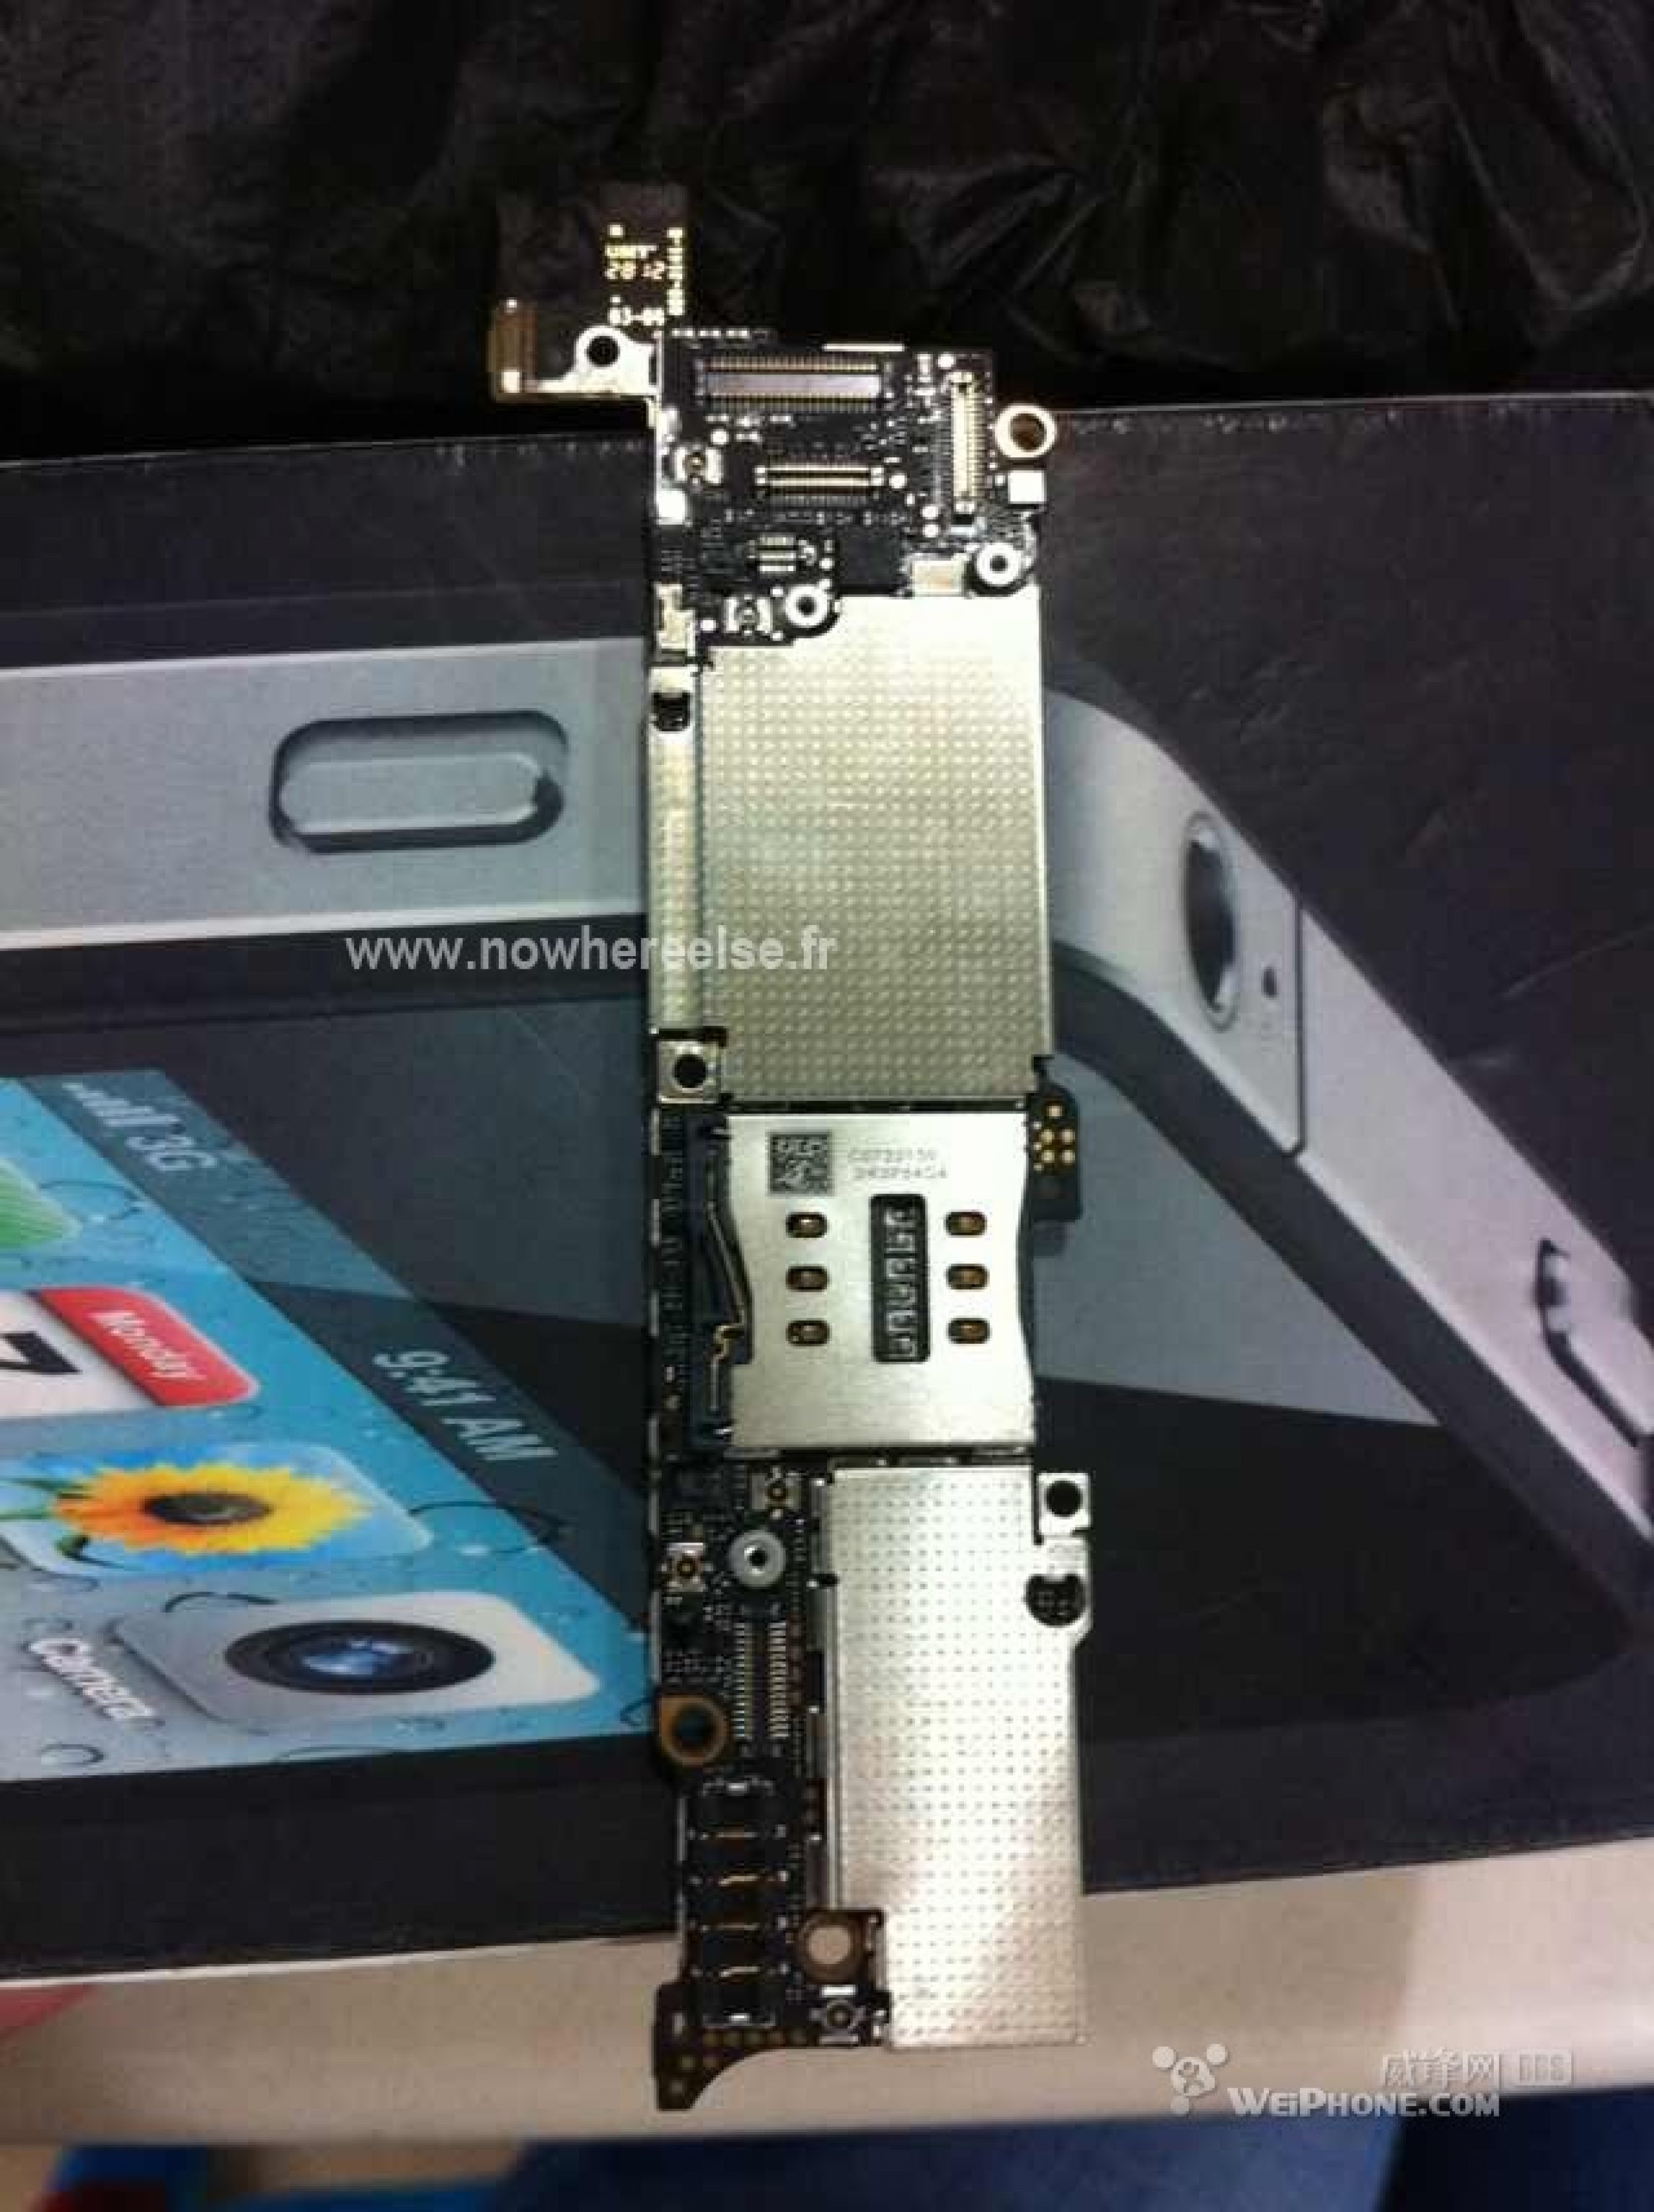 Apple iPhone 5 Features Logic Board Perfectly Fits Previous Specs Rumors, Components PICTURES